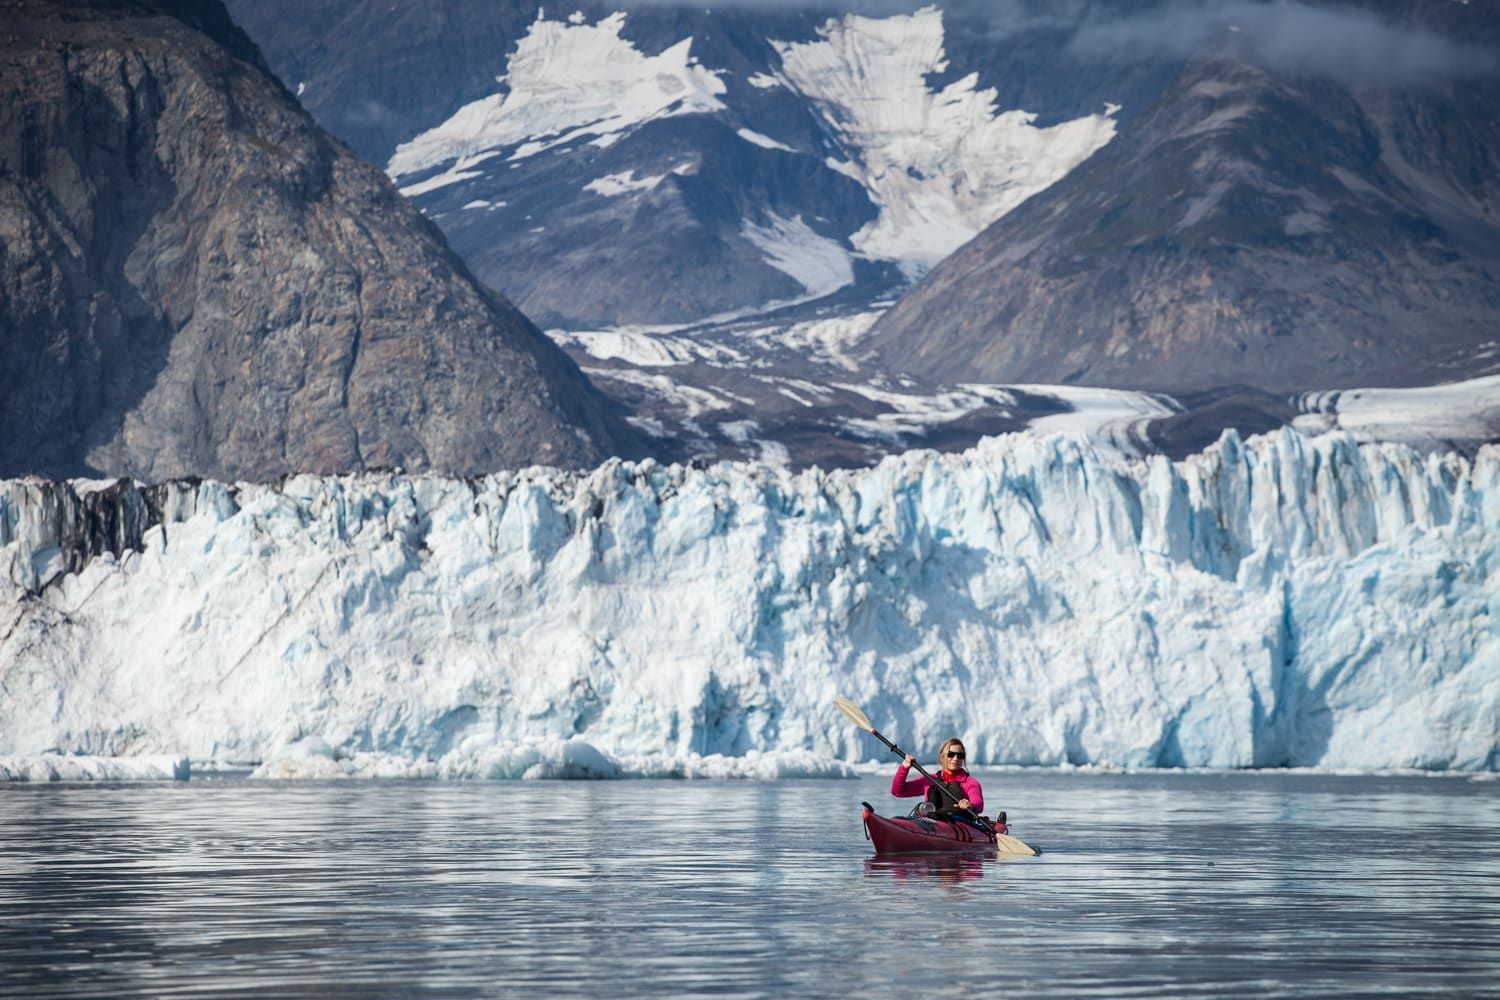 A woman kayaks in front of a glacier in Alaska.